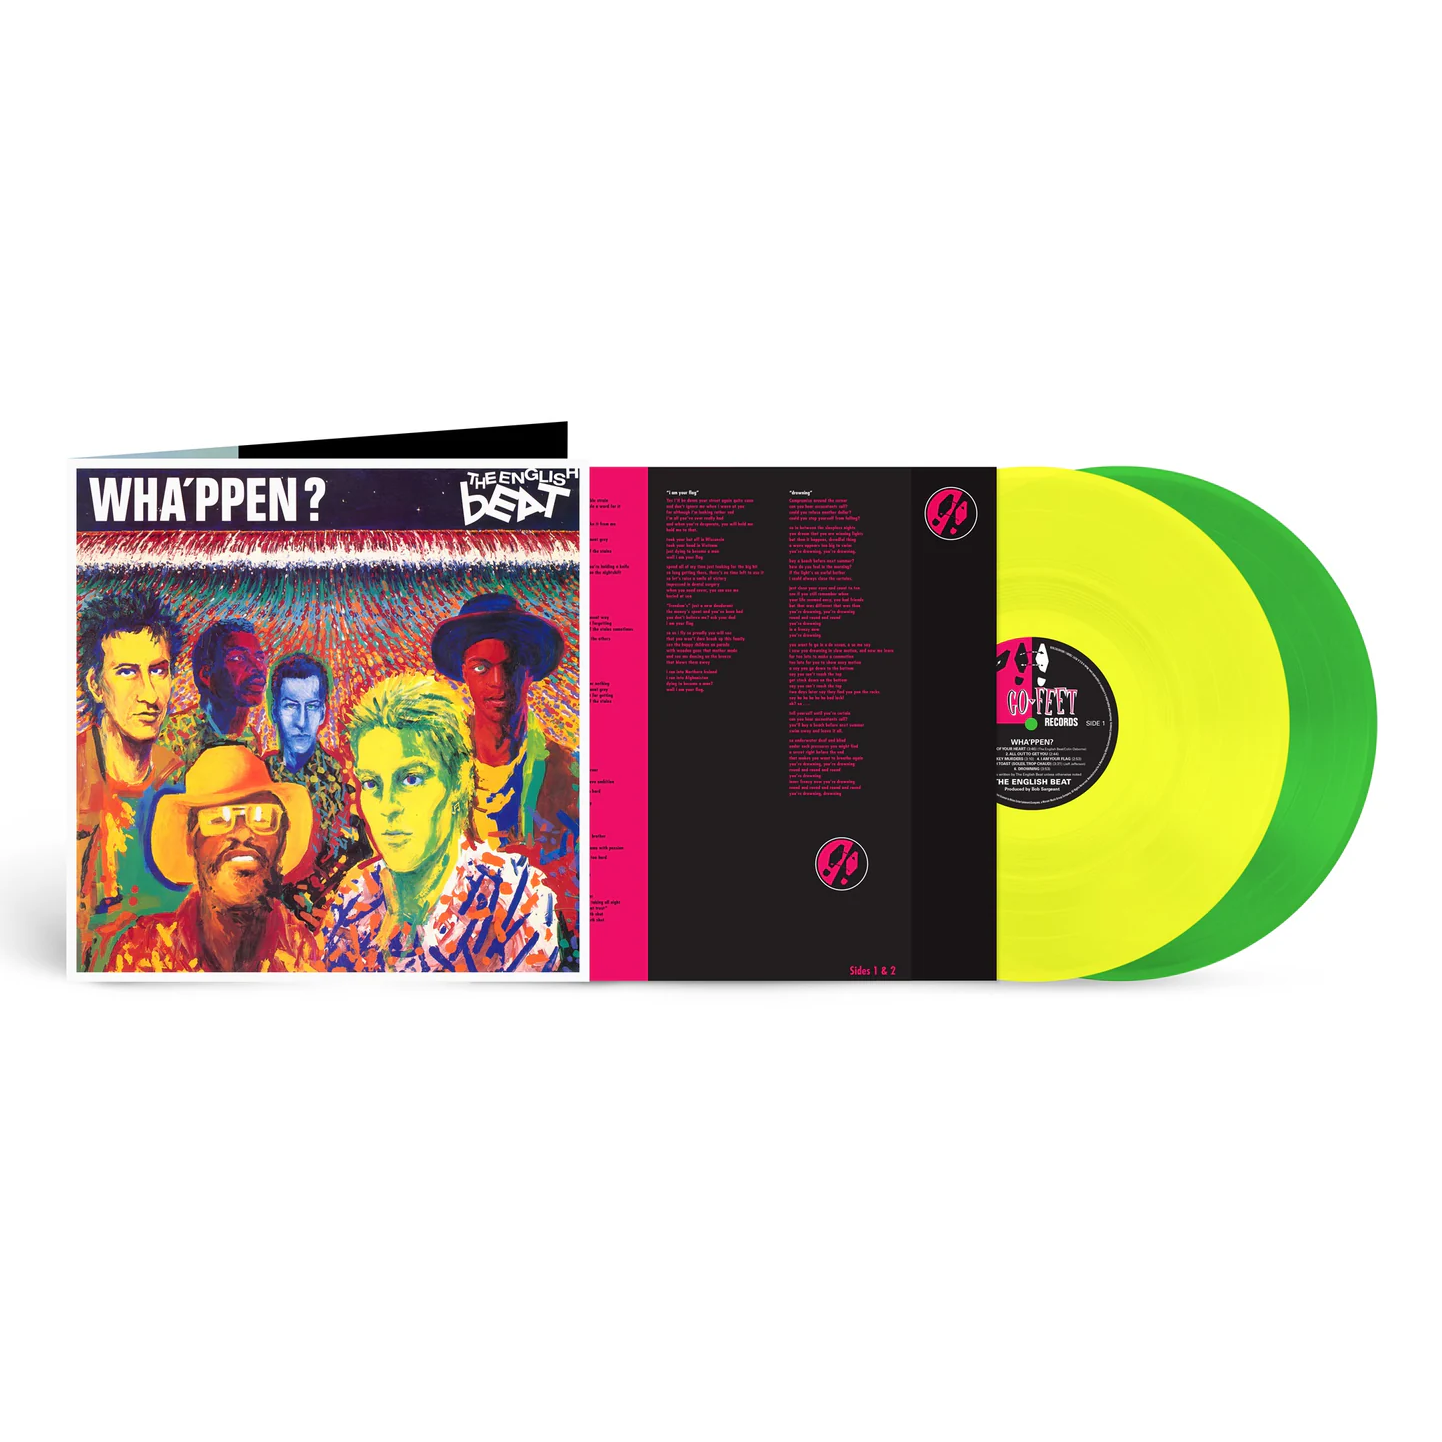 The Beat - Wha’ppen? (Expanded Edition): Limited Green & Yellow Vinyl 2LP [RSD24]